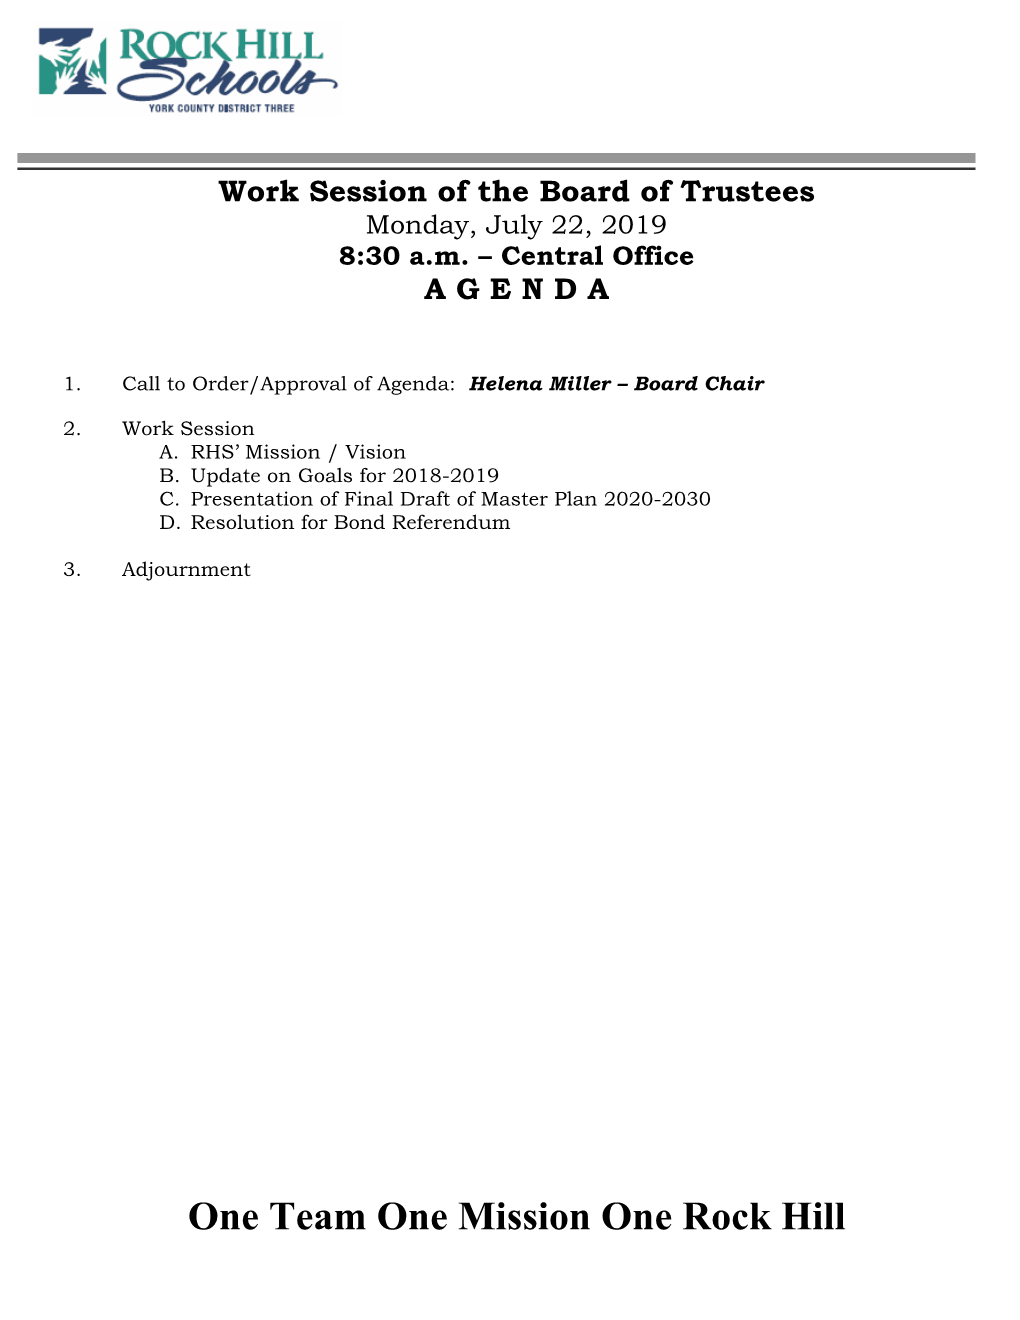 Meeting of the Board of Trustees Monday, July 22, 2019 10:00 A.M